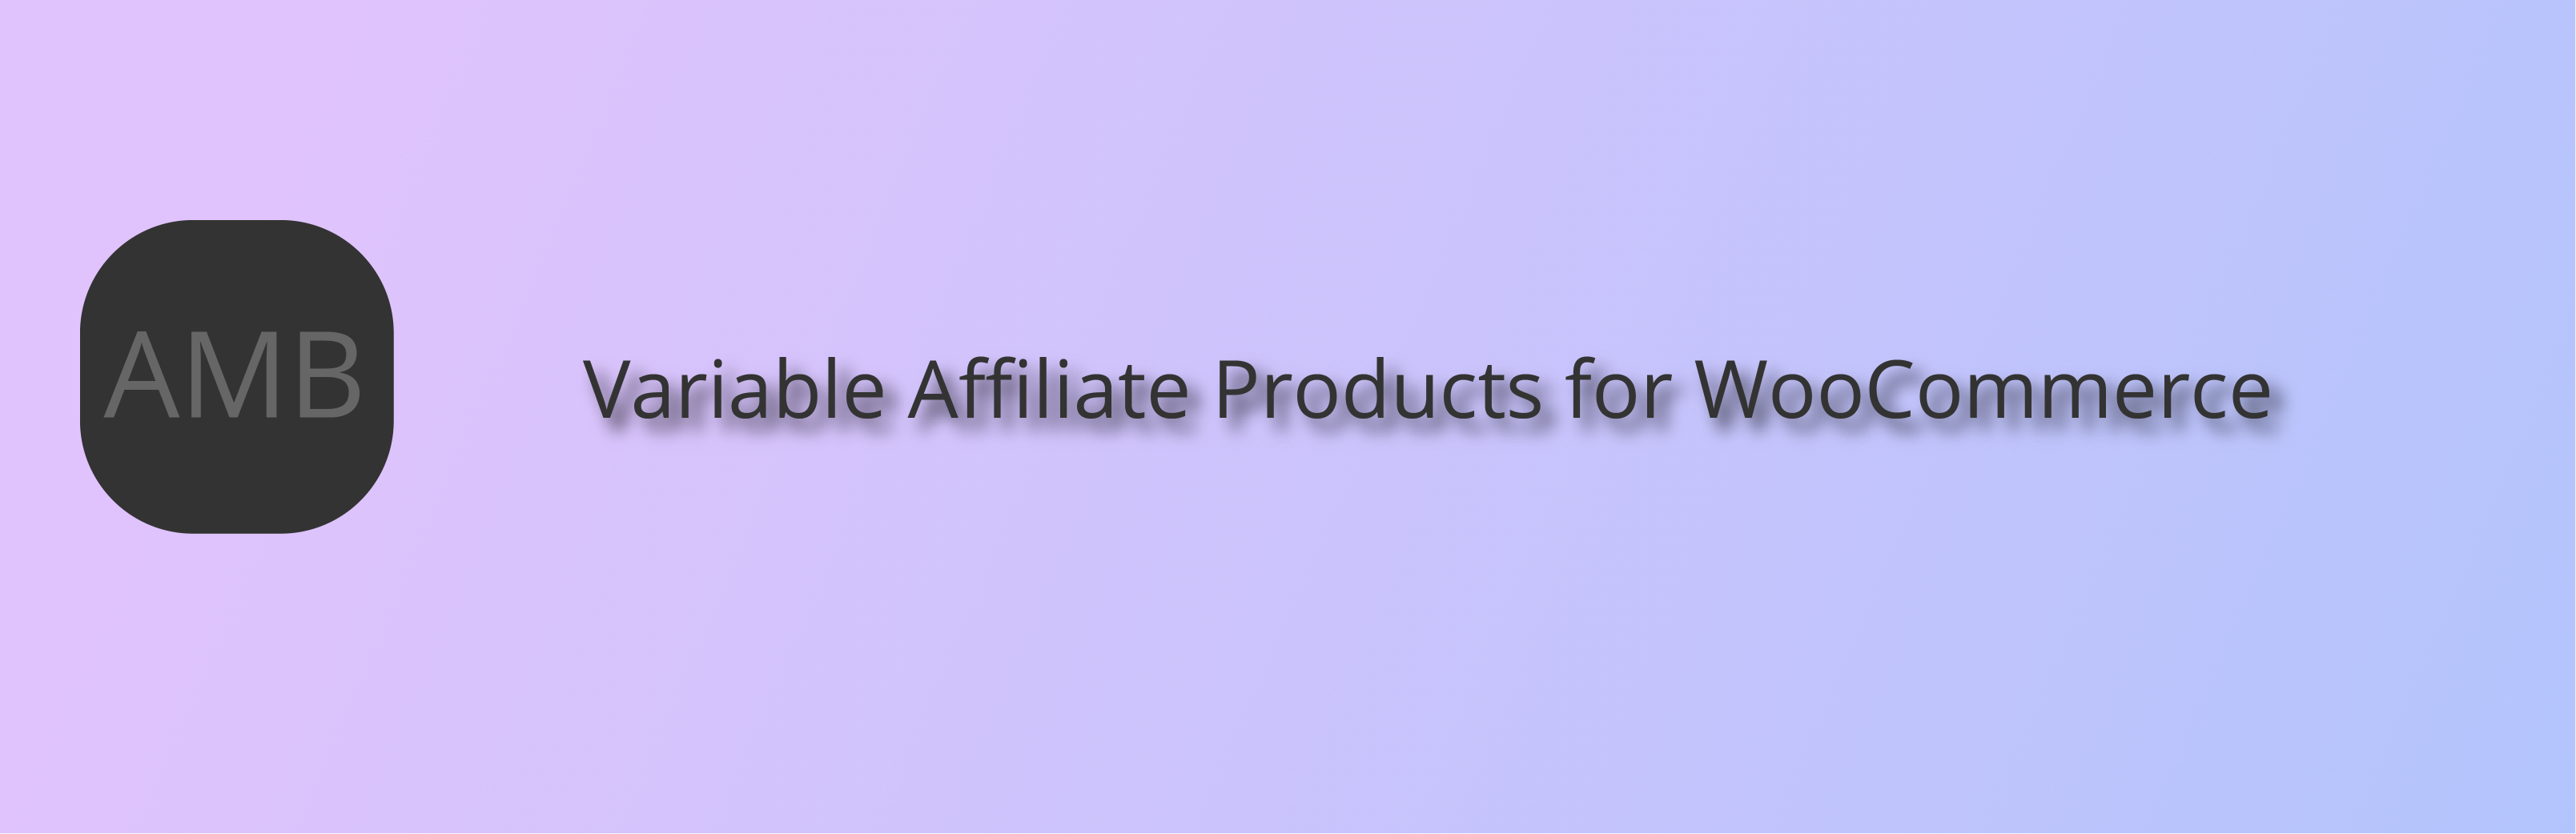 WordPress AMB Variable Affiliate Products for WooCommerce Plugin Banner Image